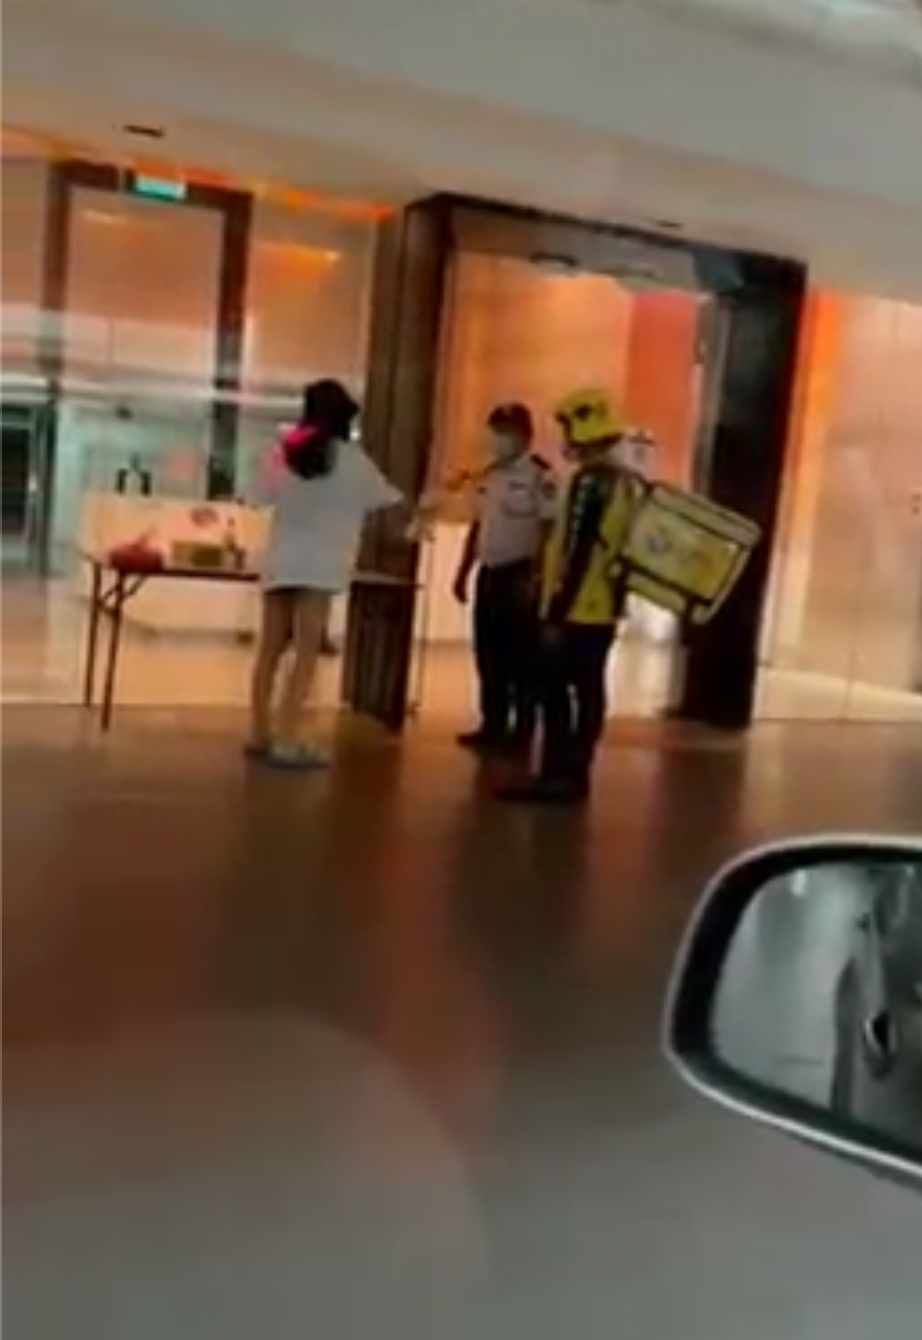 Foreigner in kl splashed bubble tea at security guard 02